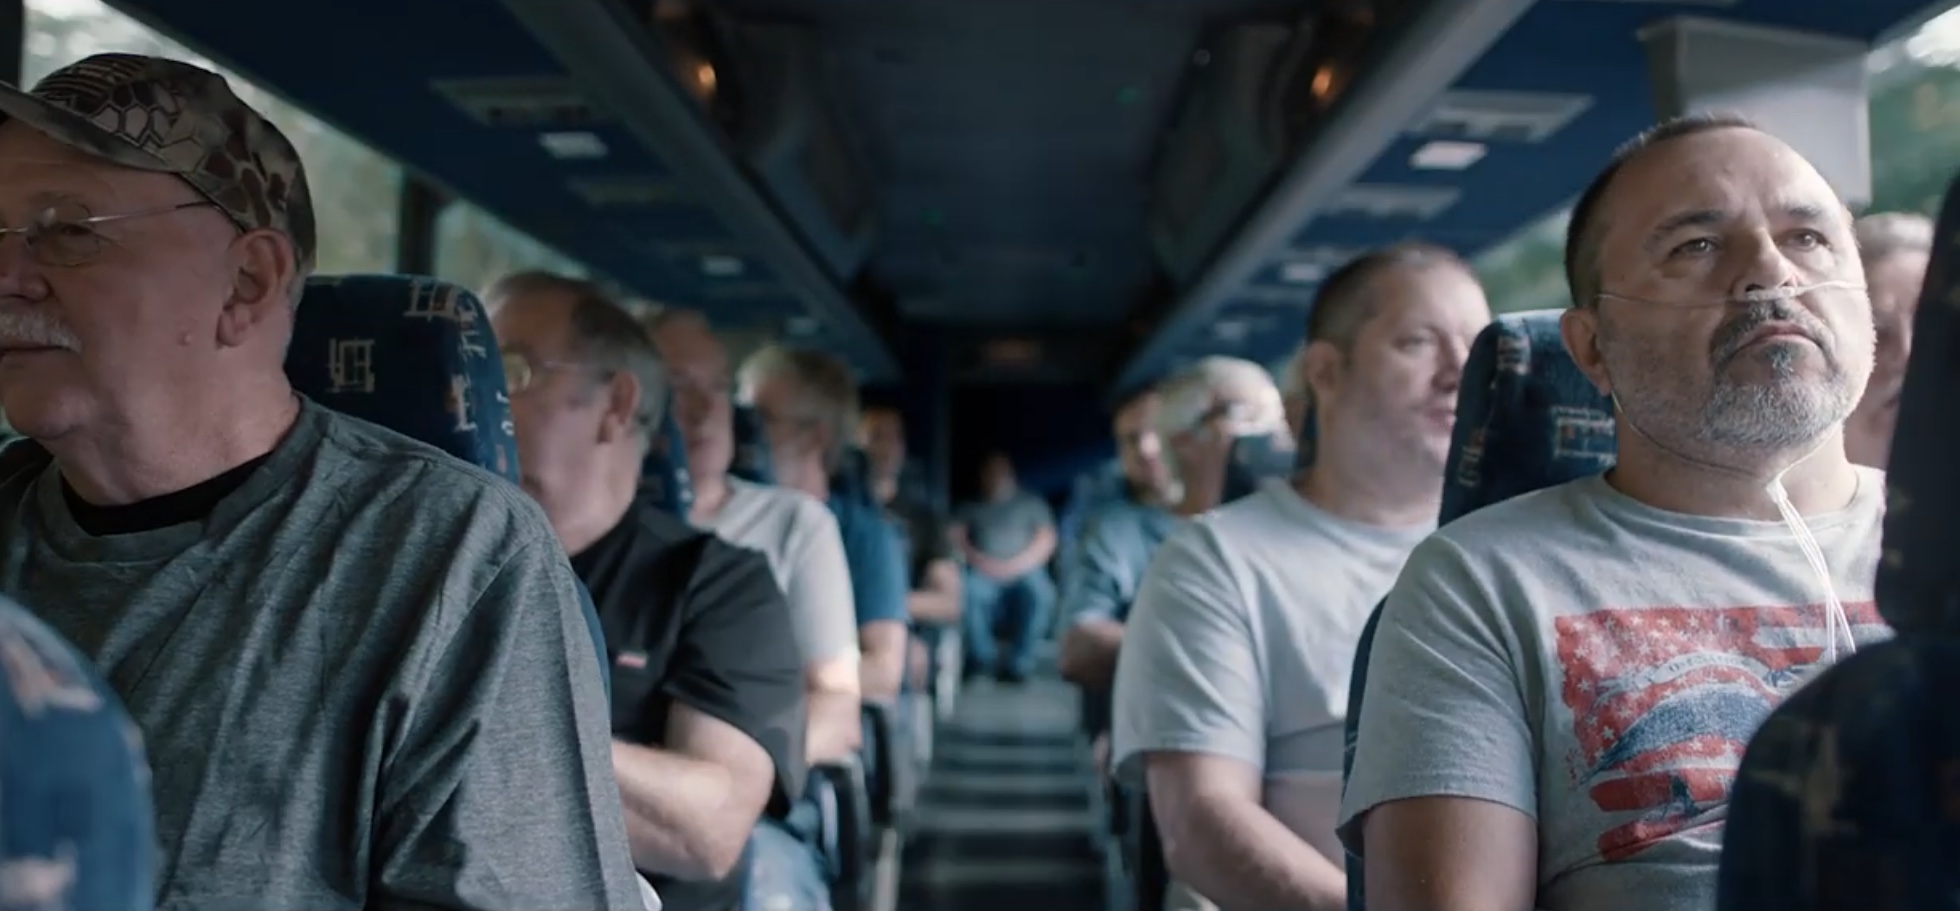 Coal miners reenact a bus ride to visit with Kentucky Republican Sen. Mitch McConnell. Opening scene from an attack ad by Democratic candidate Amy McGrath. YouTube screenshot.